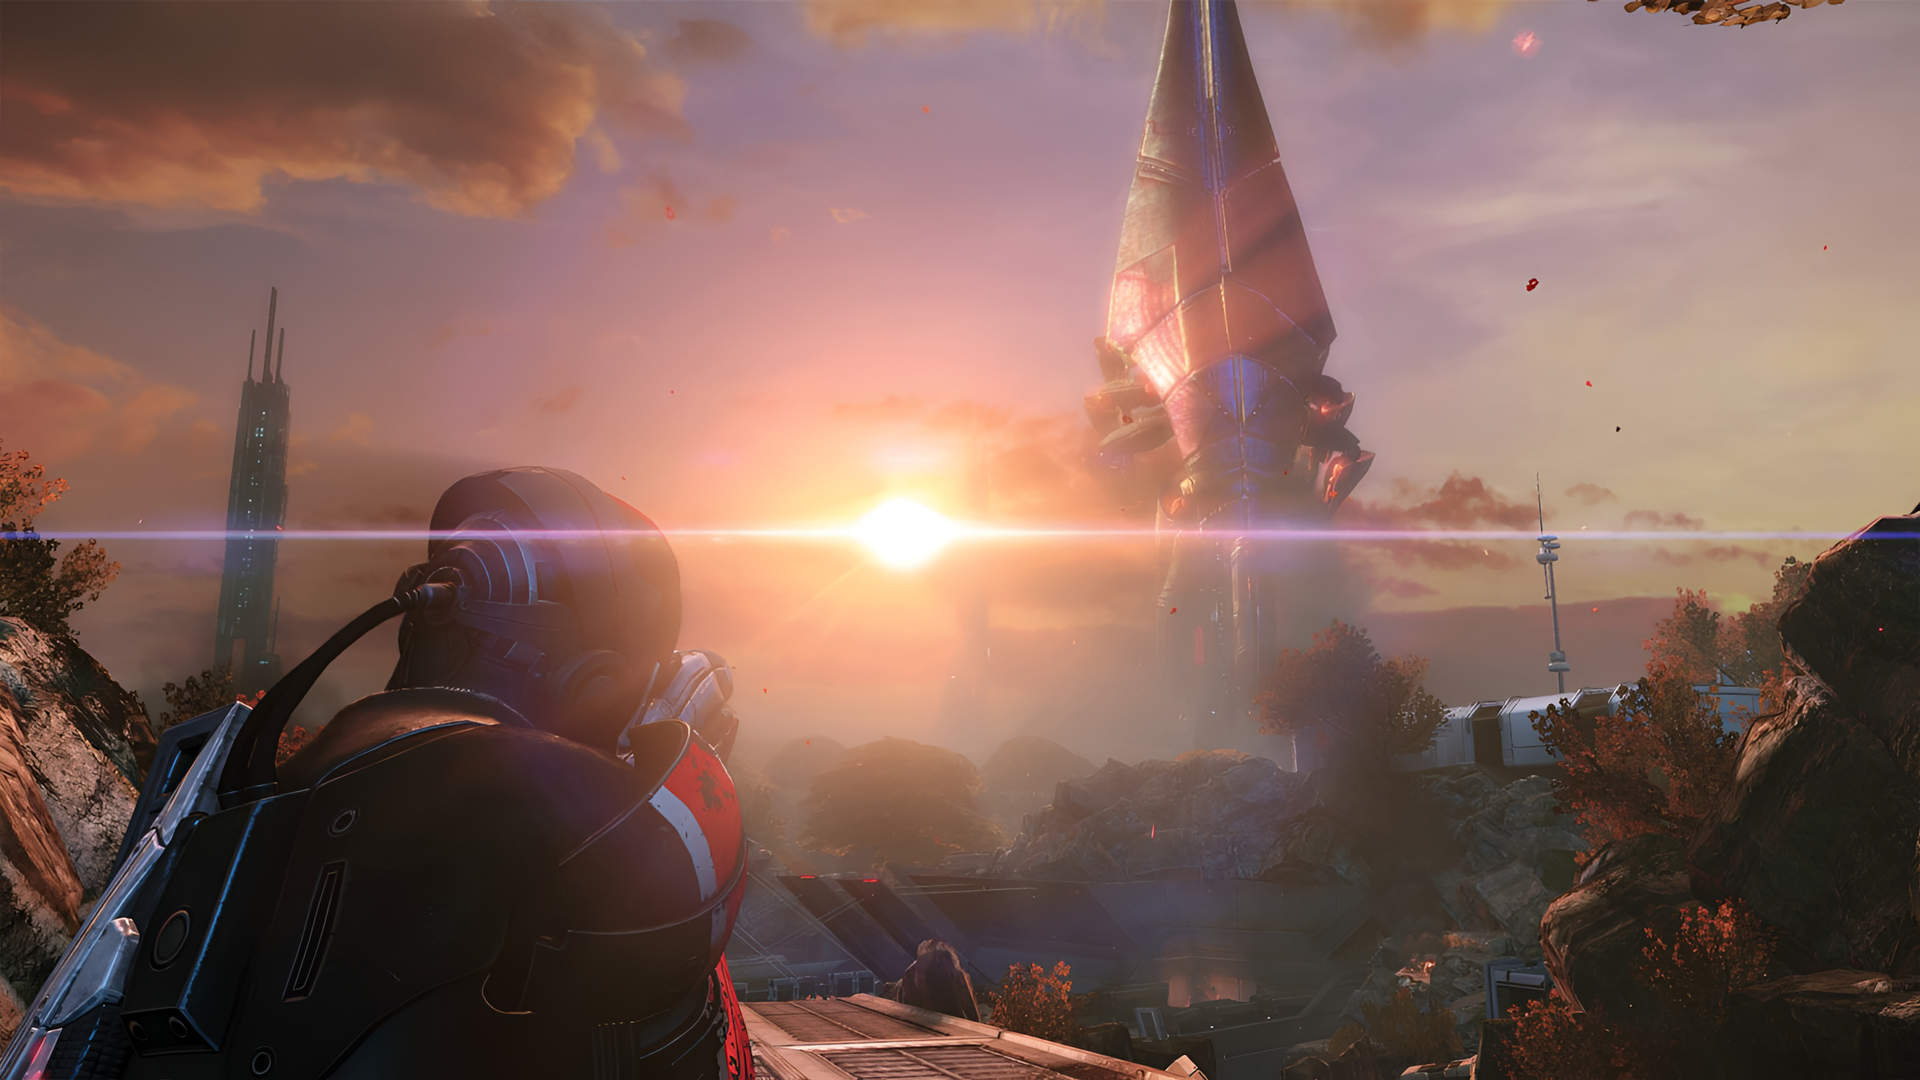 HD wallpaper featuring a scene from Mass Effect Legendary Edition with a character overlooking a sunset on an alien planet.